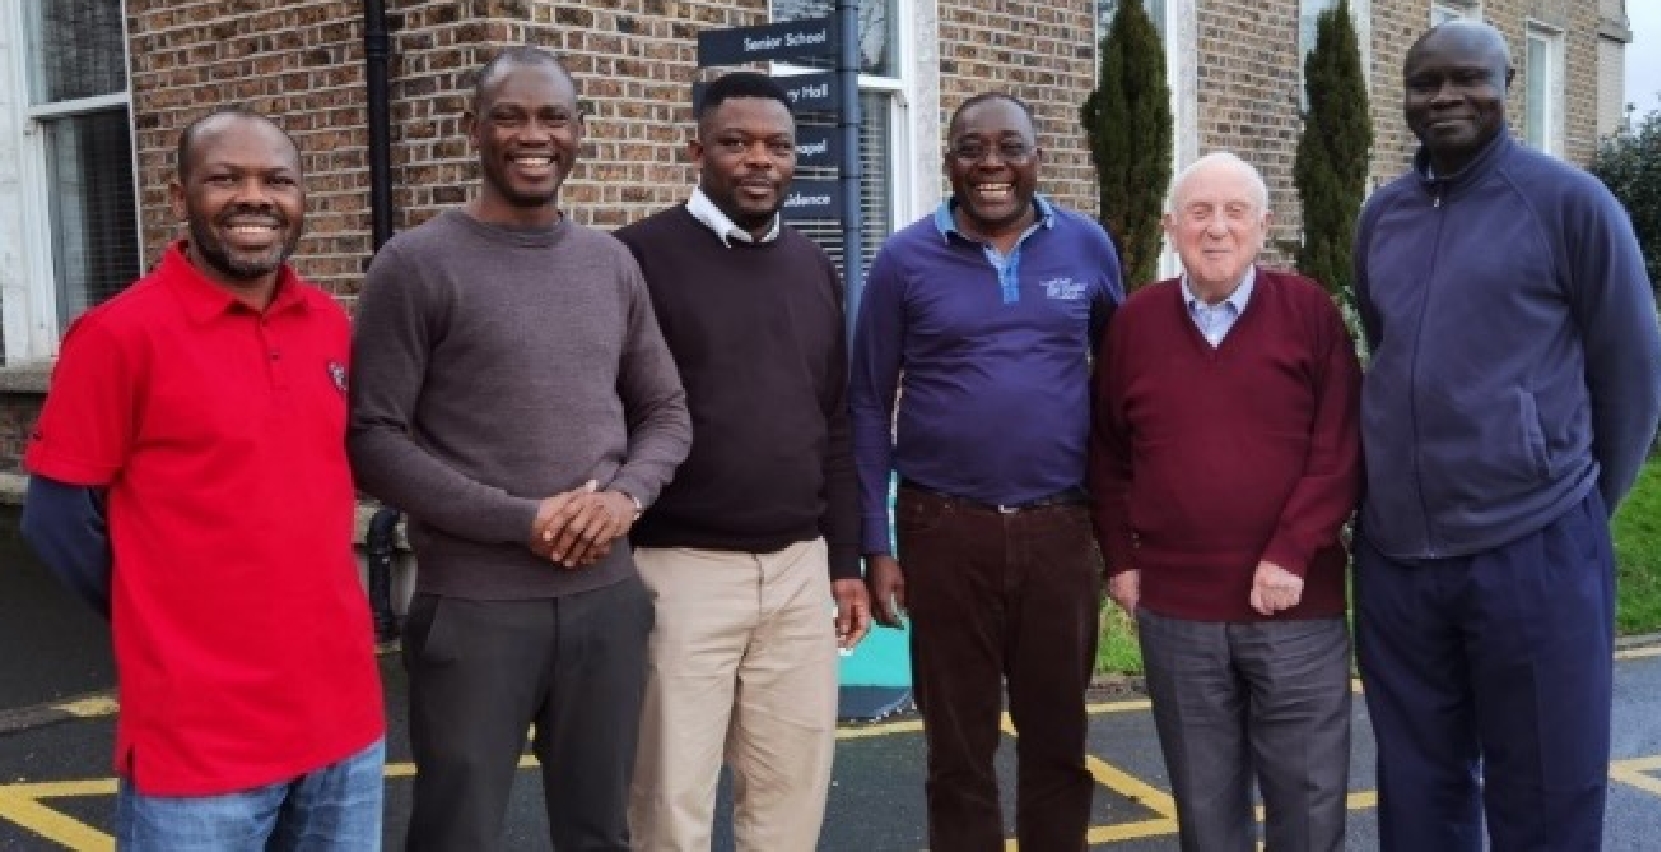 Fr Alain (fourth from left) with (L-R) St Mary’s College community members: Fr Abraham Jov, Fr Maxwell Atuguba, Fr Crispin Mbumba, Bro Ignatius Curry and Fr Martin Andama